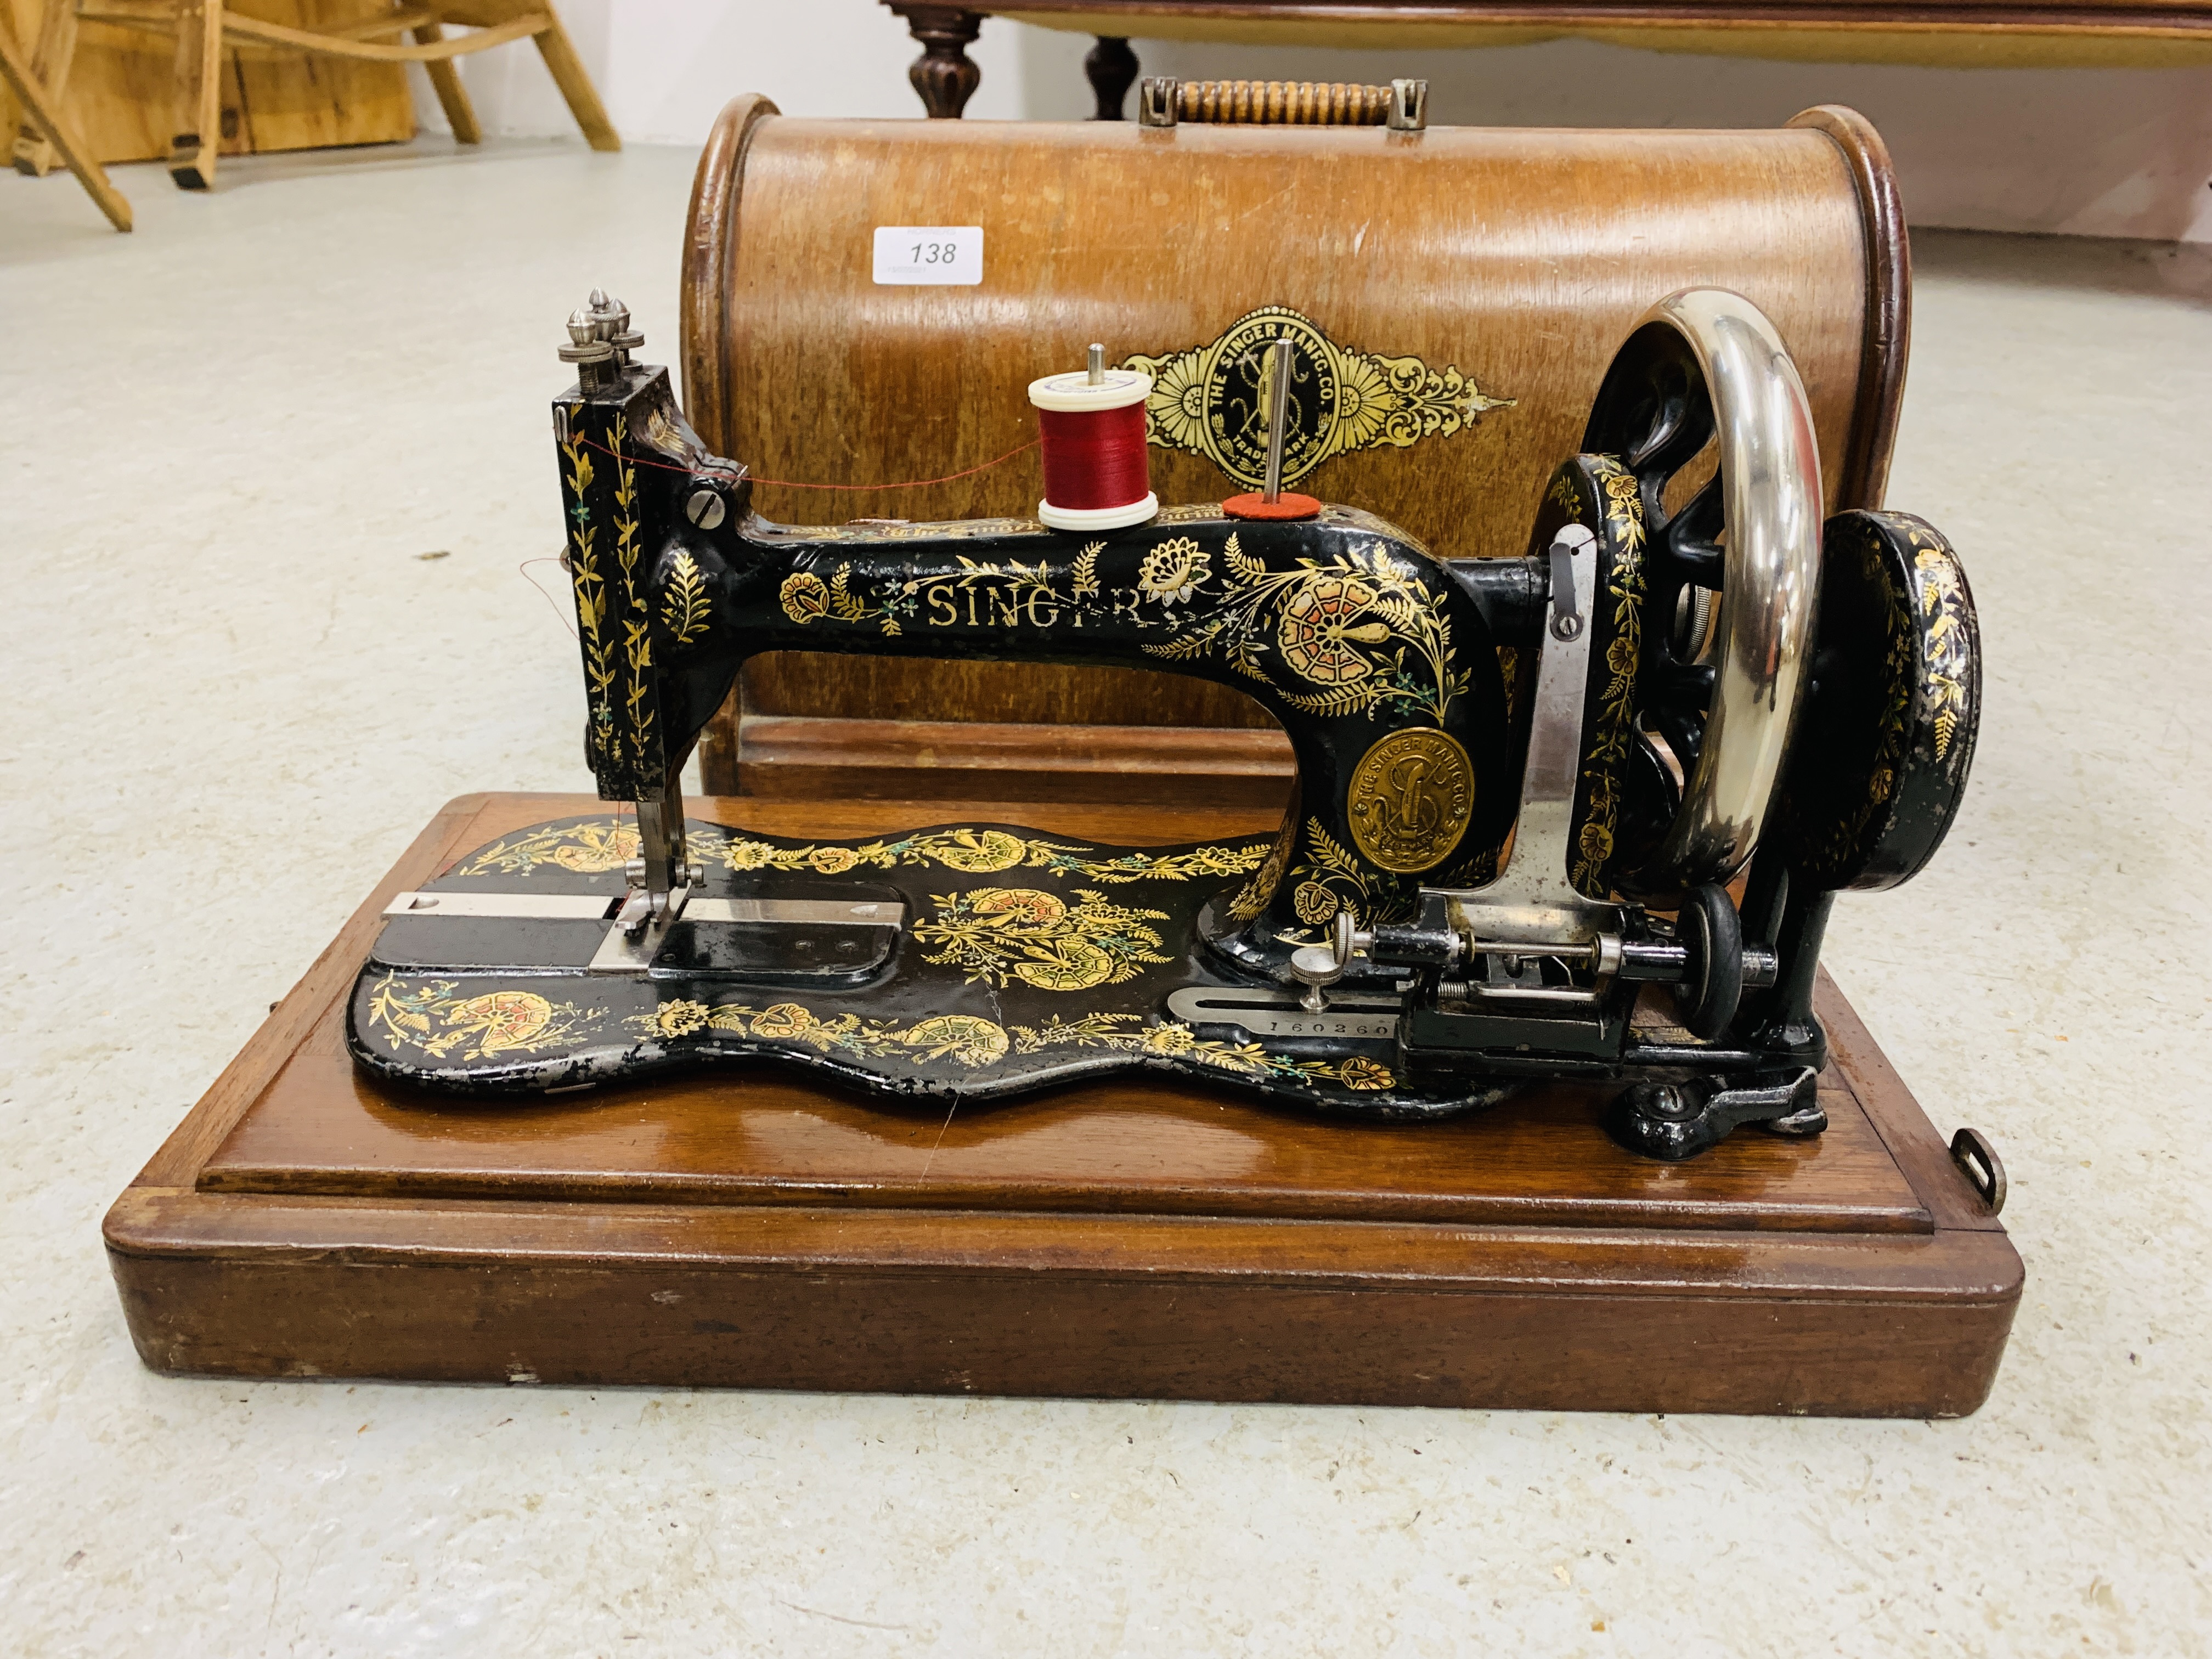 A VINTAGE SINGER GILT DECORATED MANUAL SEWING MACHINE UNDER ORIGINAL DOMED COVER - Image 2 of 6